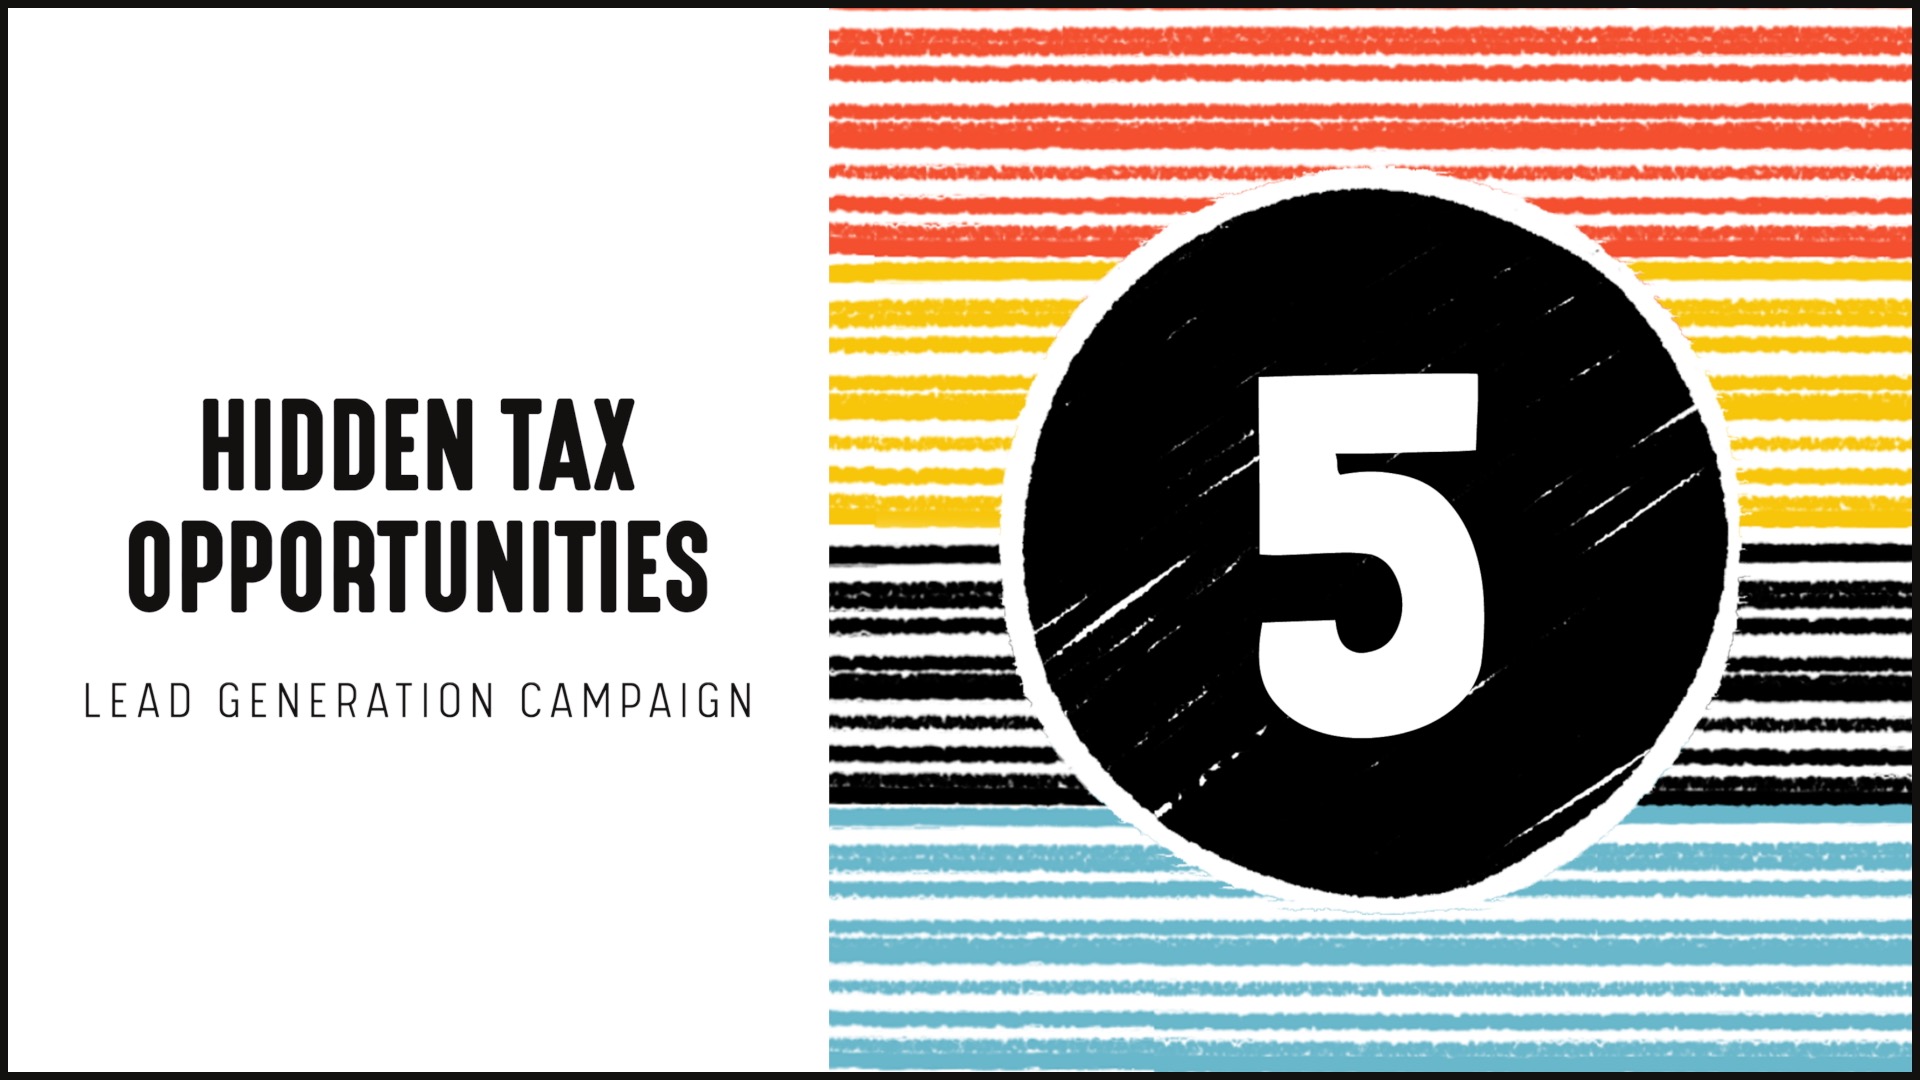 [NEW] Lead Generation Campaign | Hidden Tax Opportunities (That Are Likely to Expire)